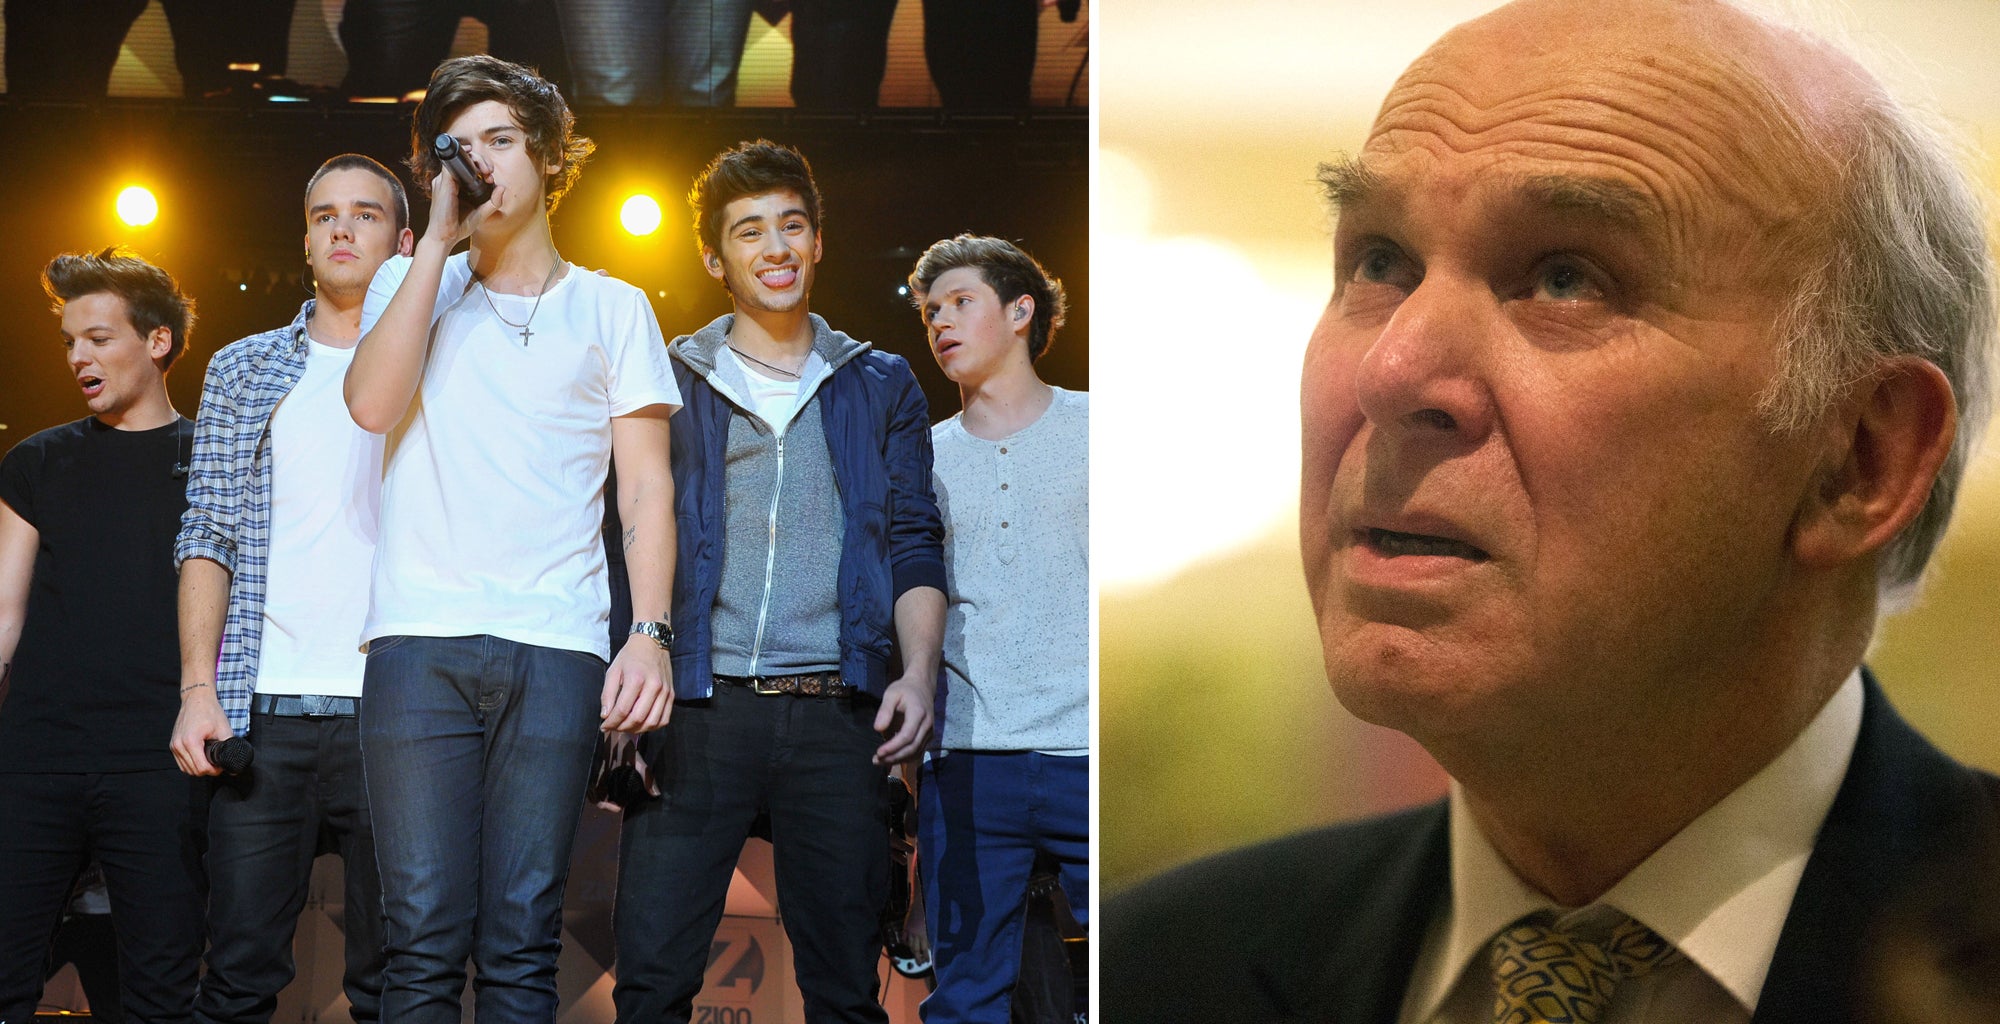 Left: Boy band One Direction; Right, business secretary Vince Cable